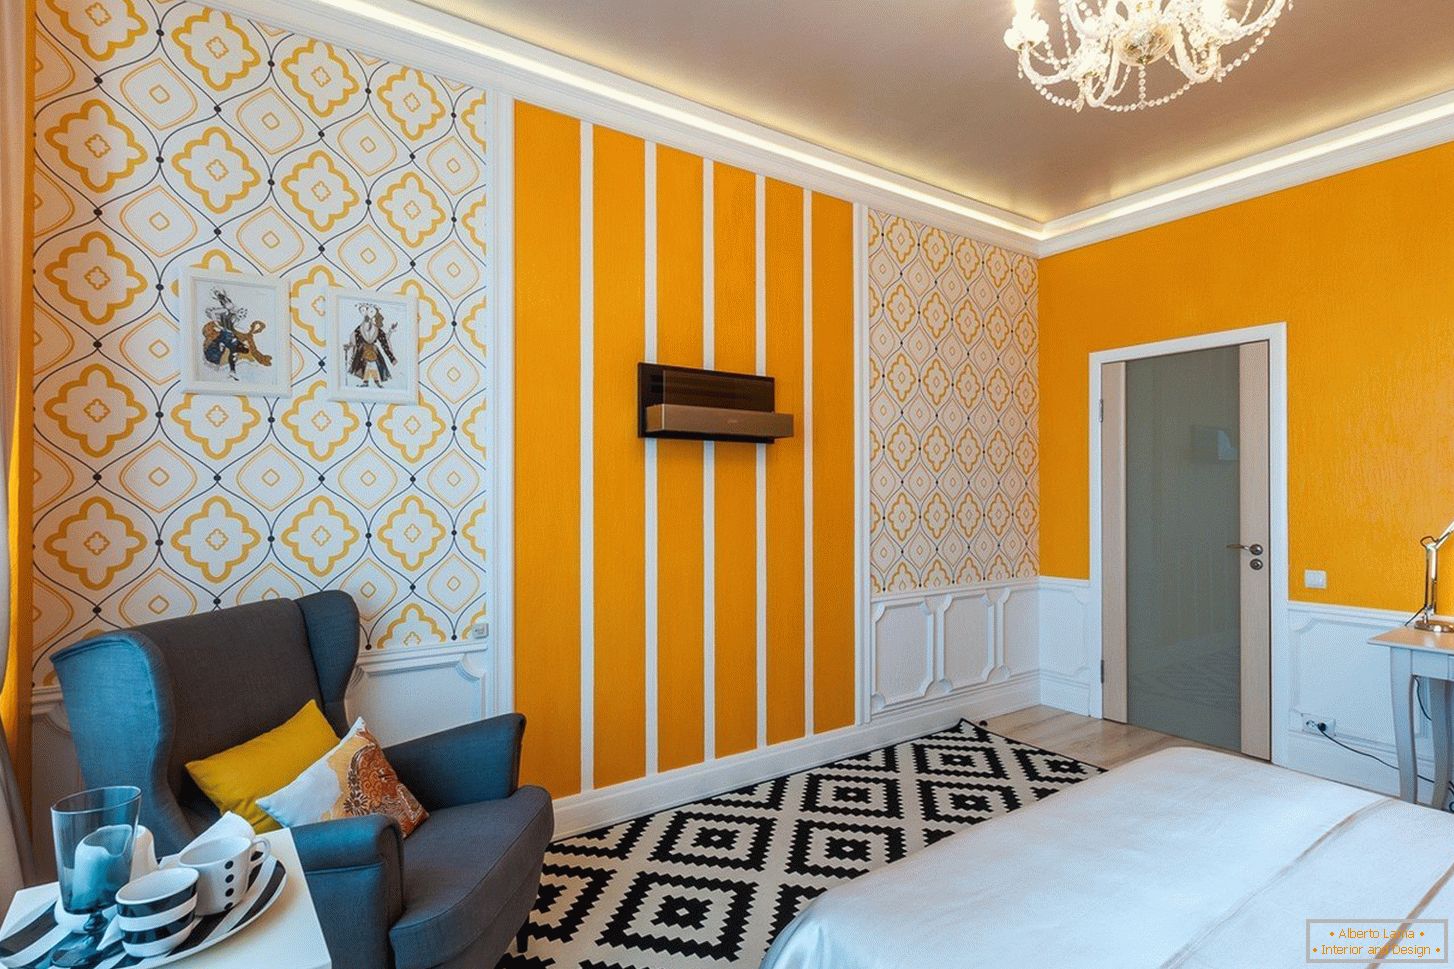 Combination of three types of wallpaper in one color scheme